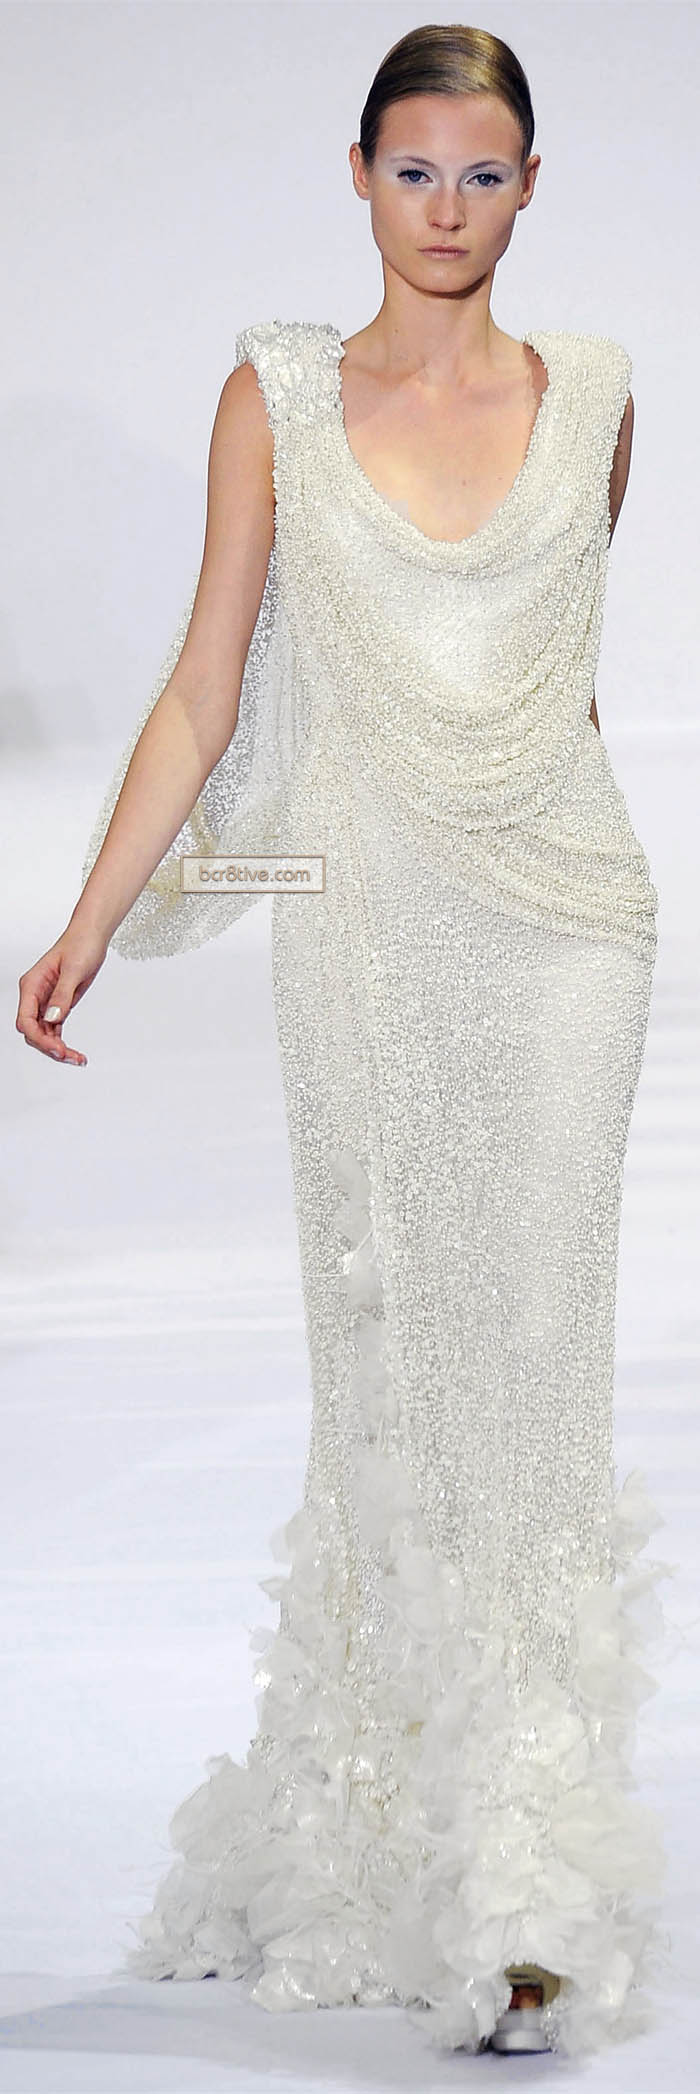 Elie Saab Fall Winter 2009 Haute Couture – Be Creative